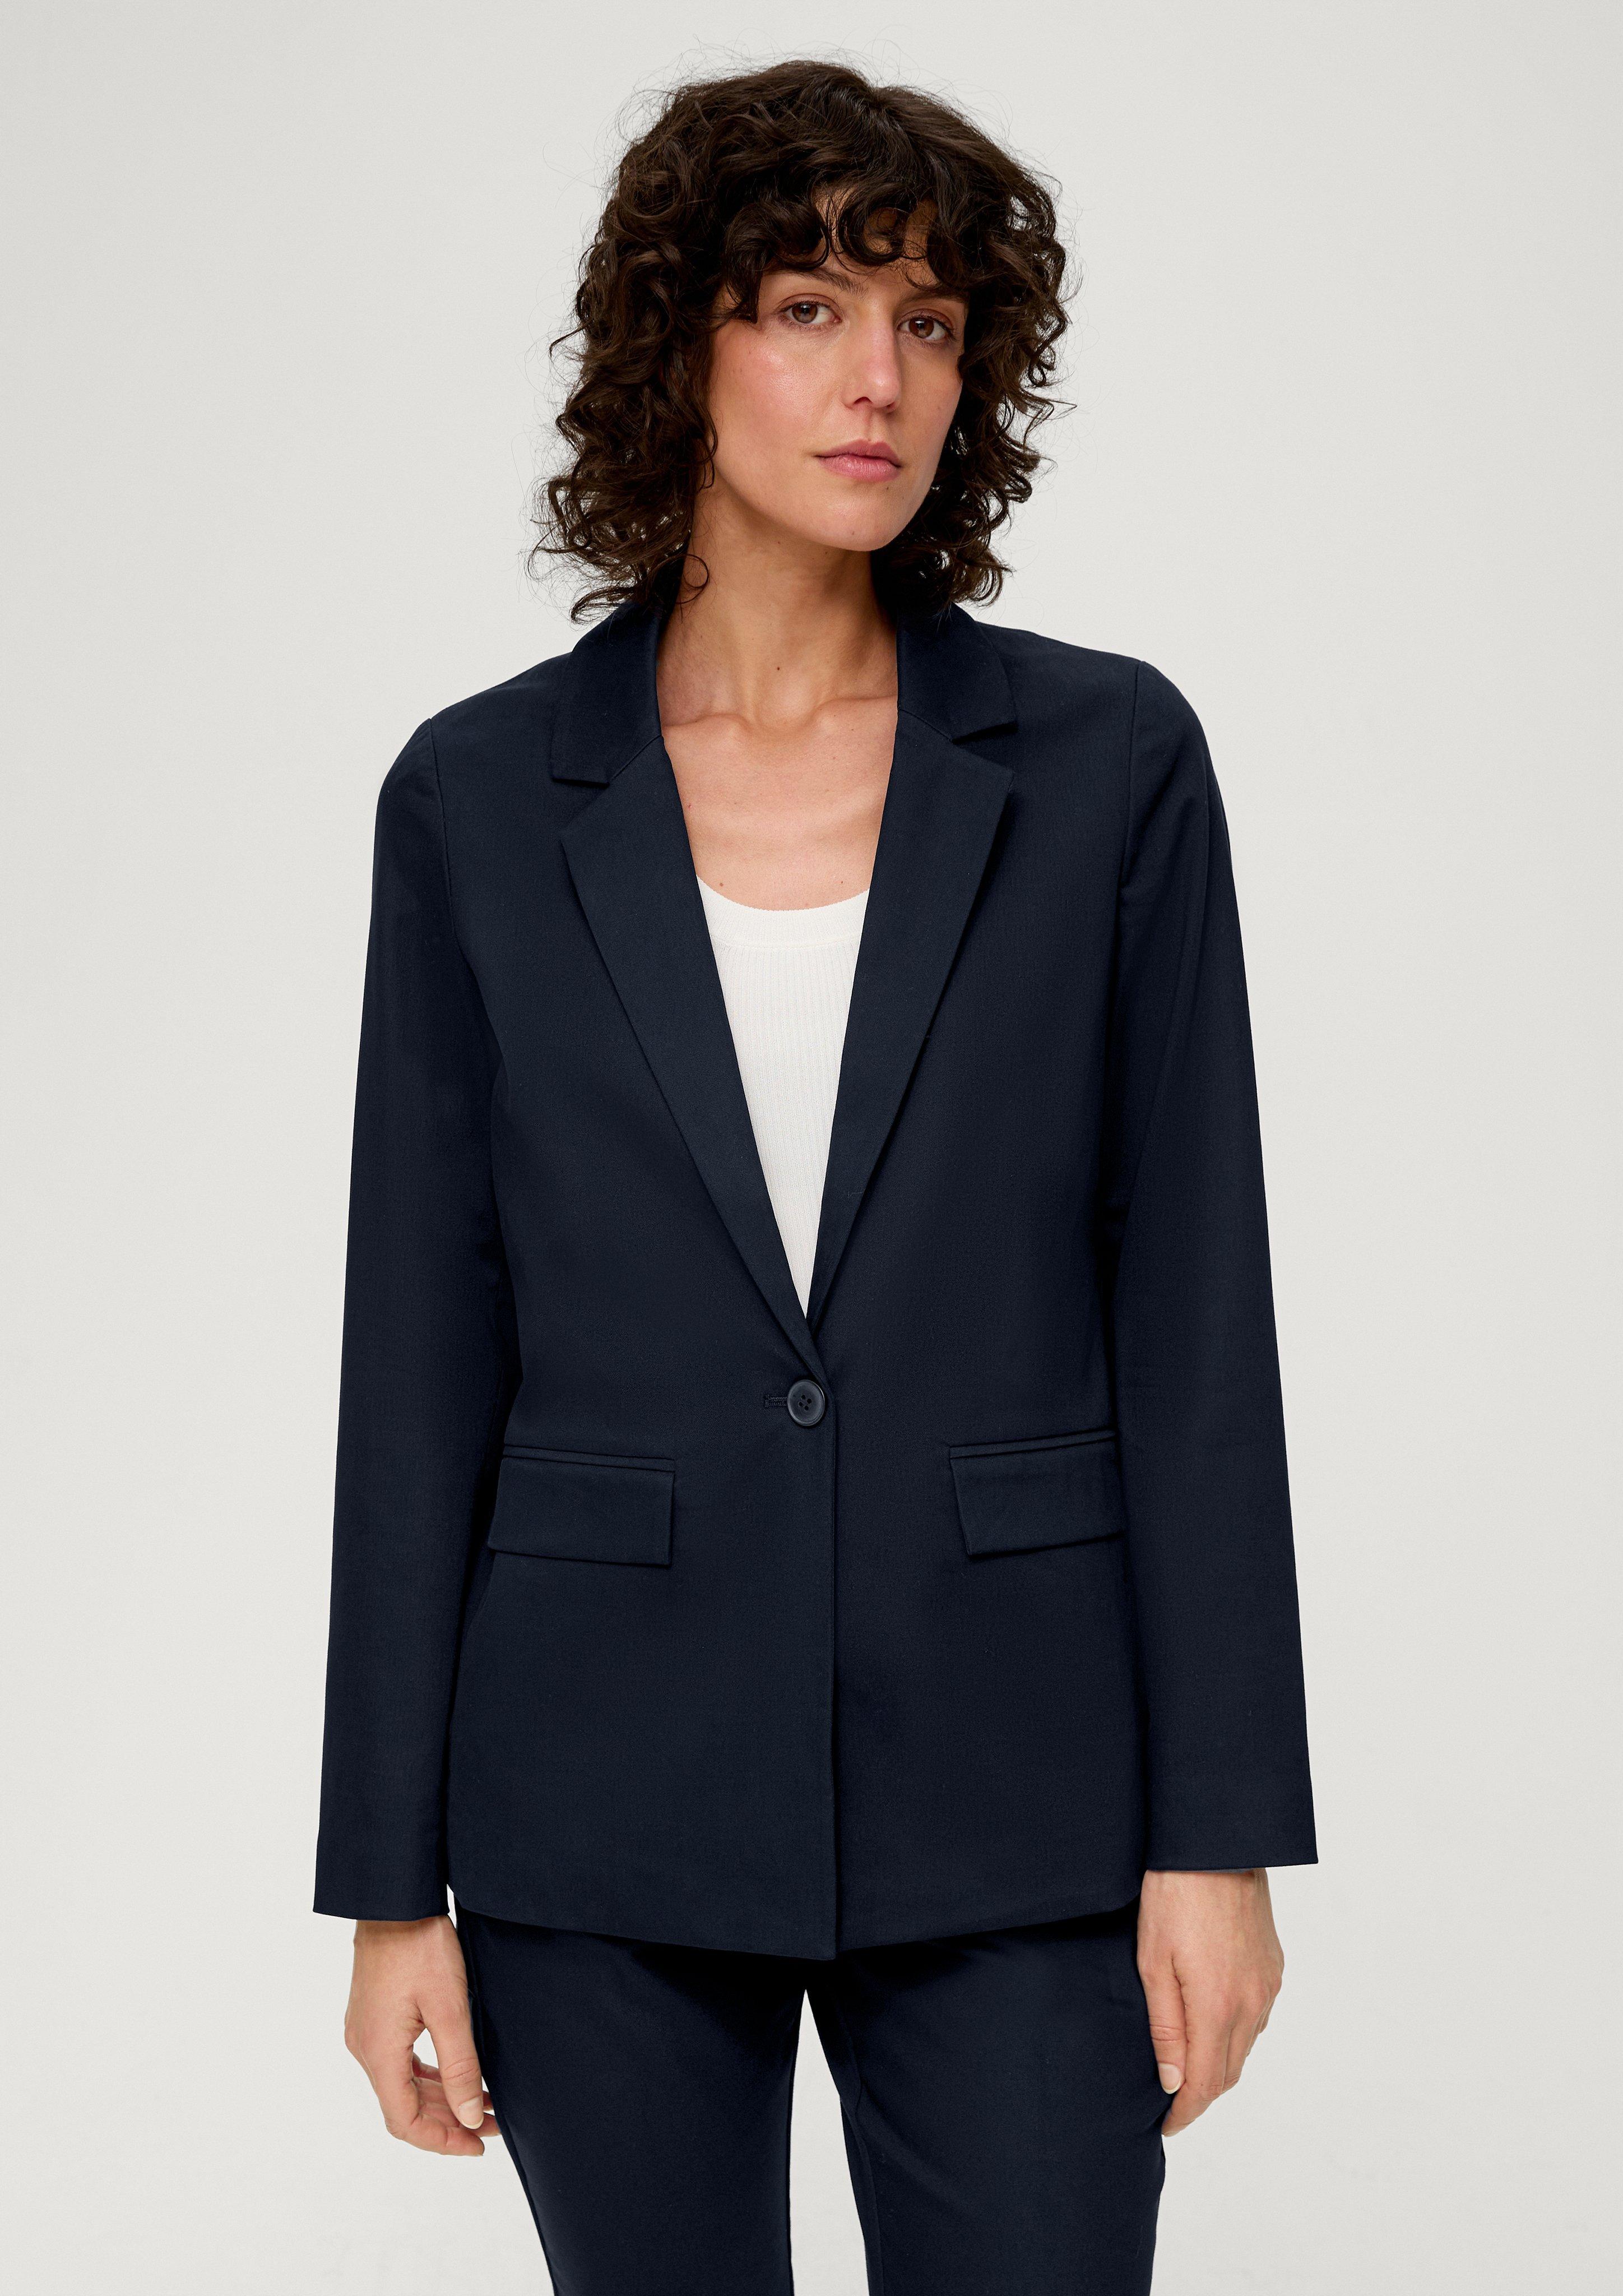 Woven fabric jacket - navy | s.Oliver